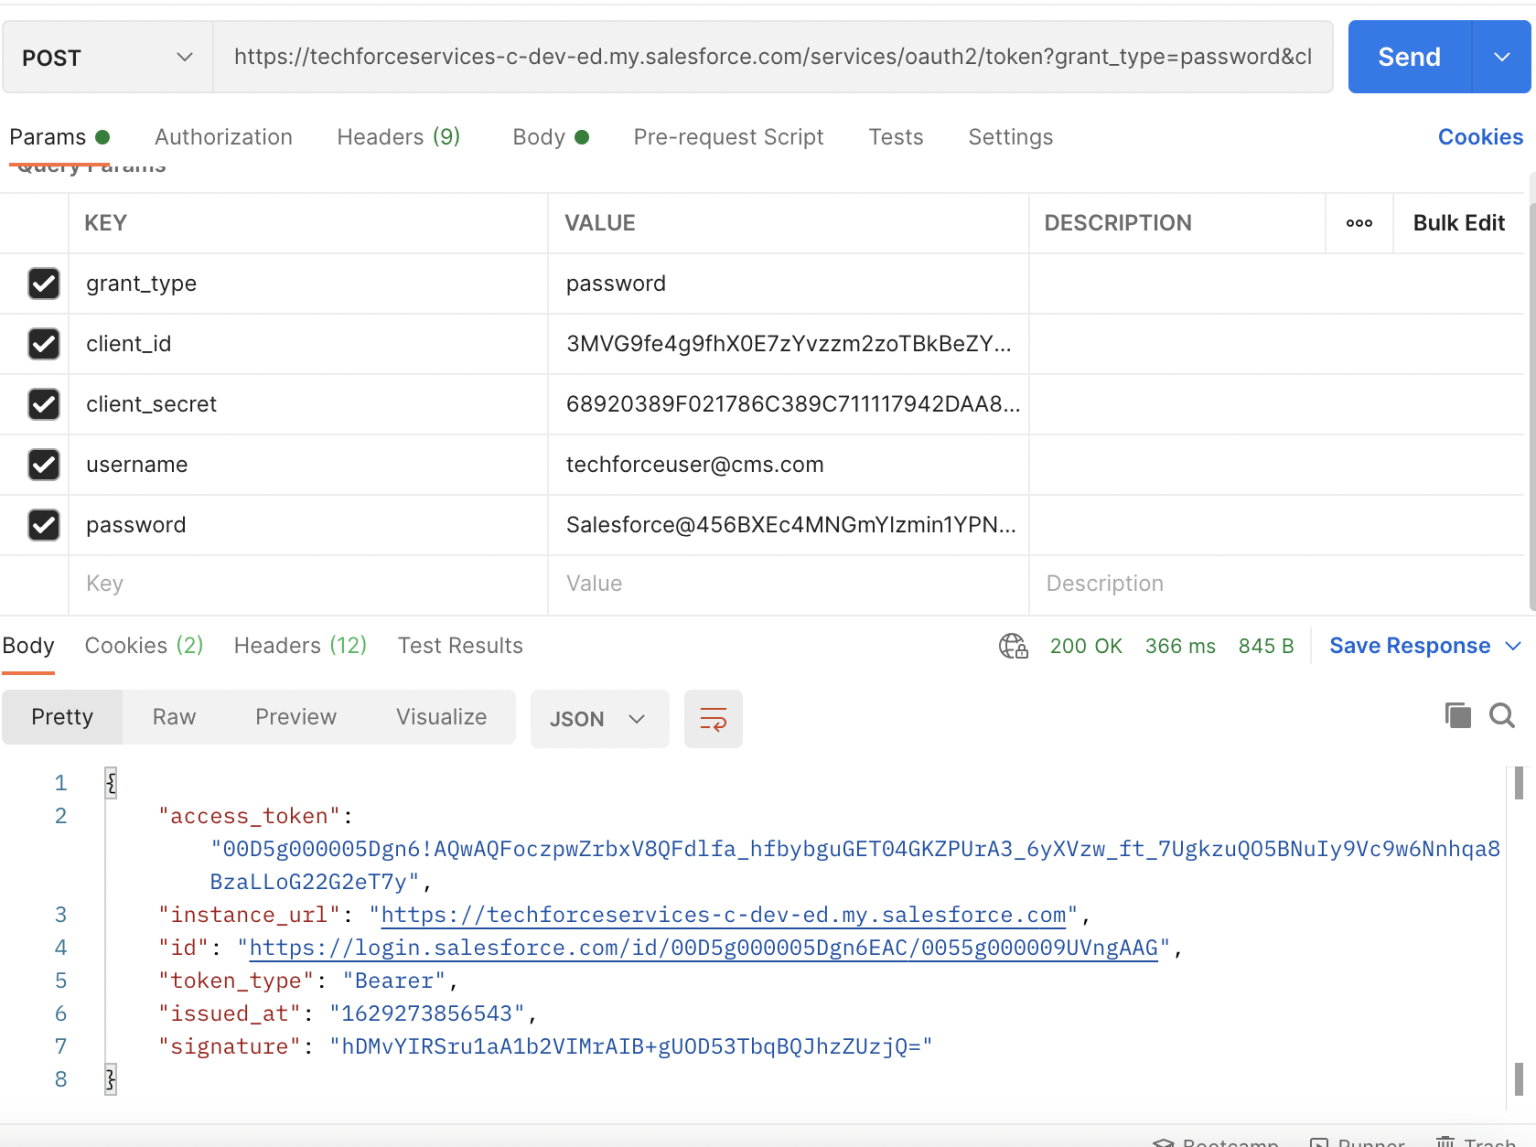 API CONNECTION WITH SALESFORCE CMS FROM POSTMAN/WORKBENCH FOR TESTING OUTPUT